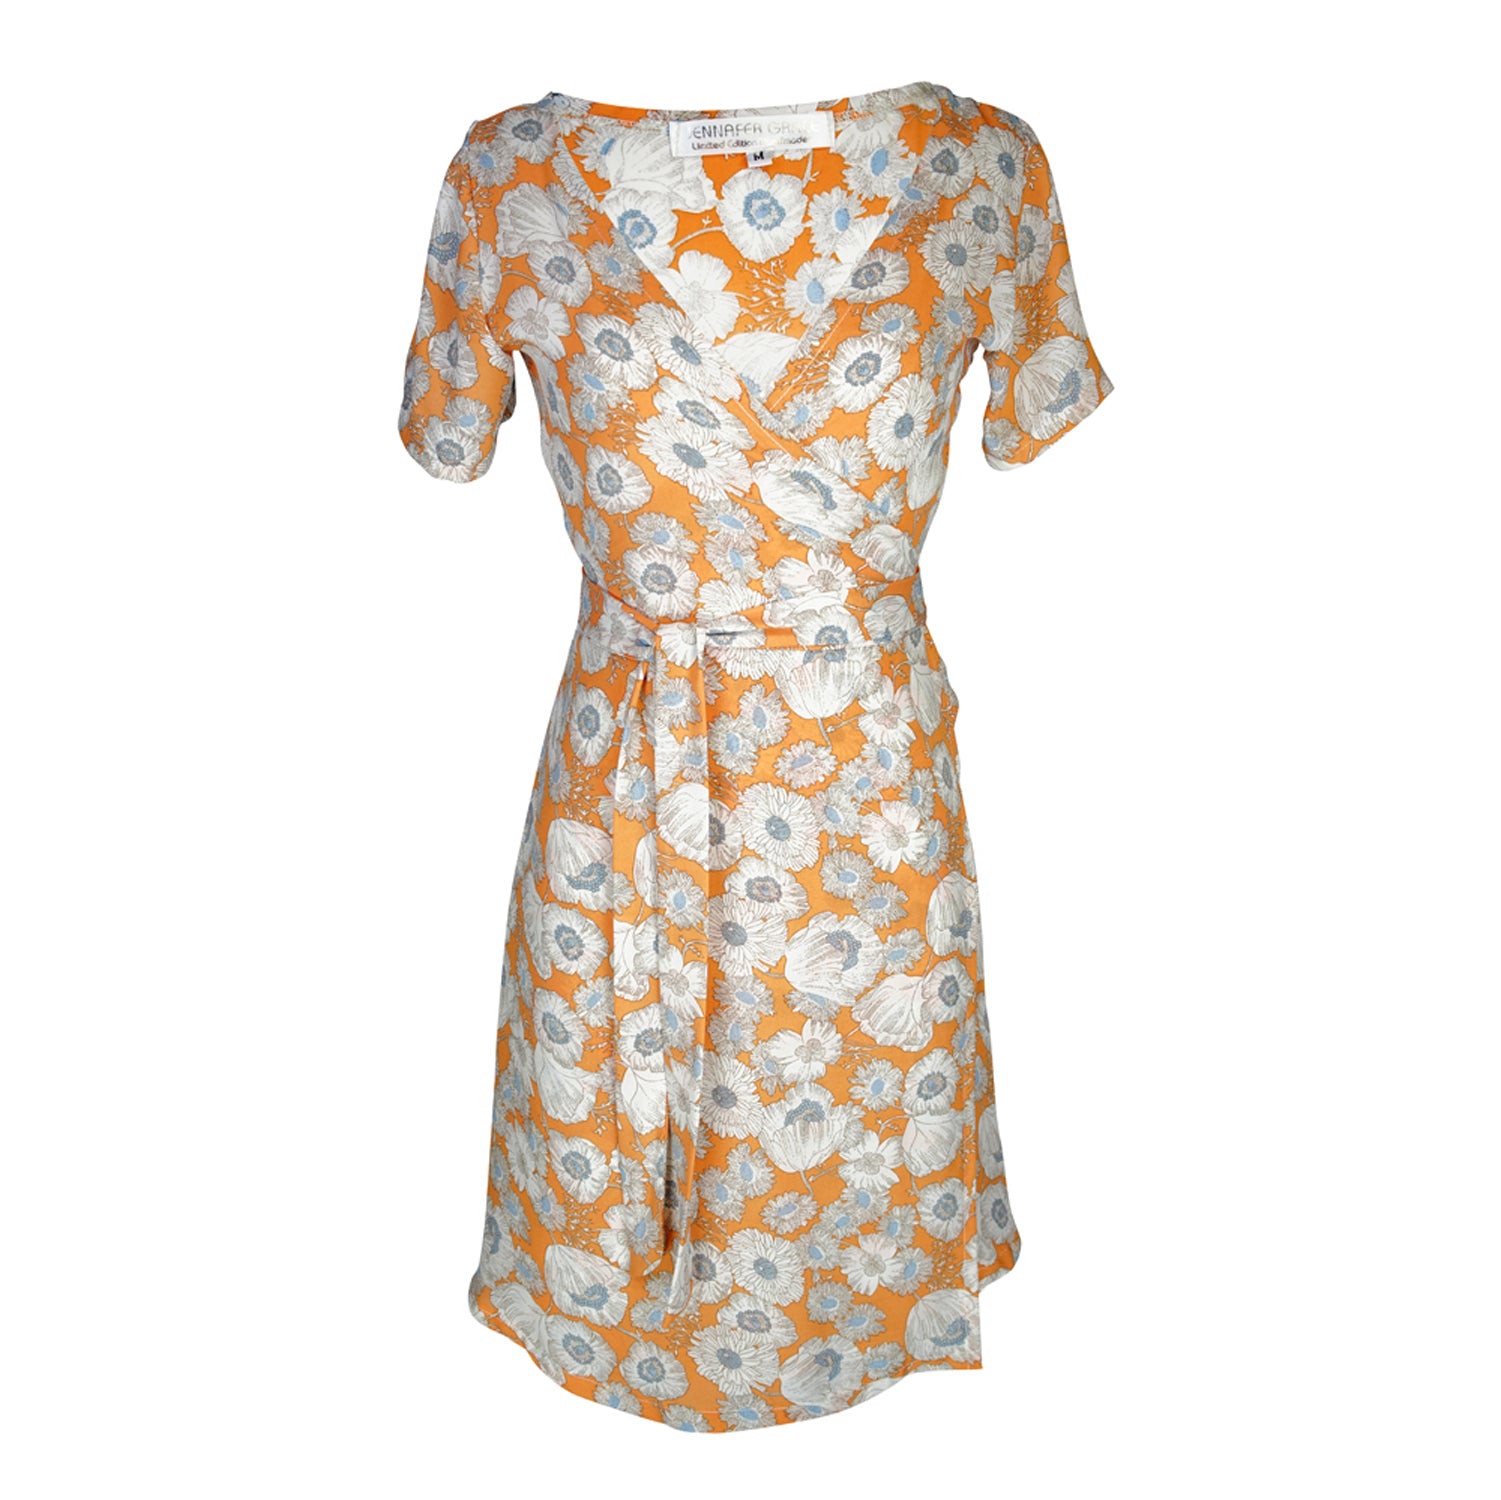 Short-sleeve, v-neck wrap dress. Mini in length, with orange base with white and blue floral poppy flower print. 1960s bohemian summer dress in style.